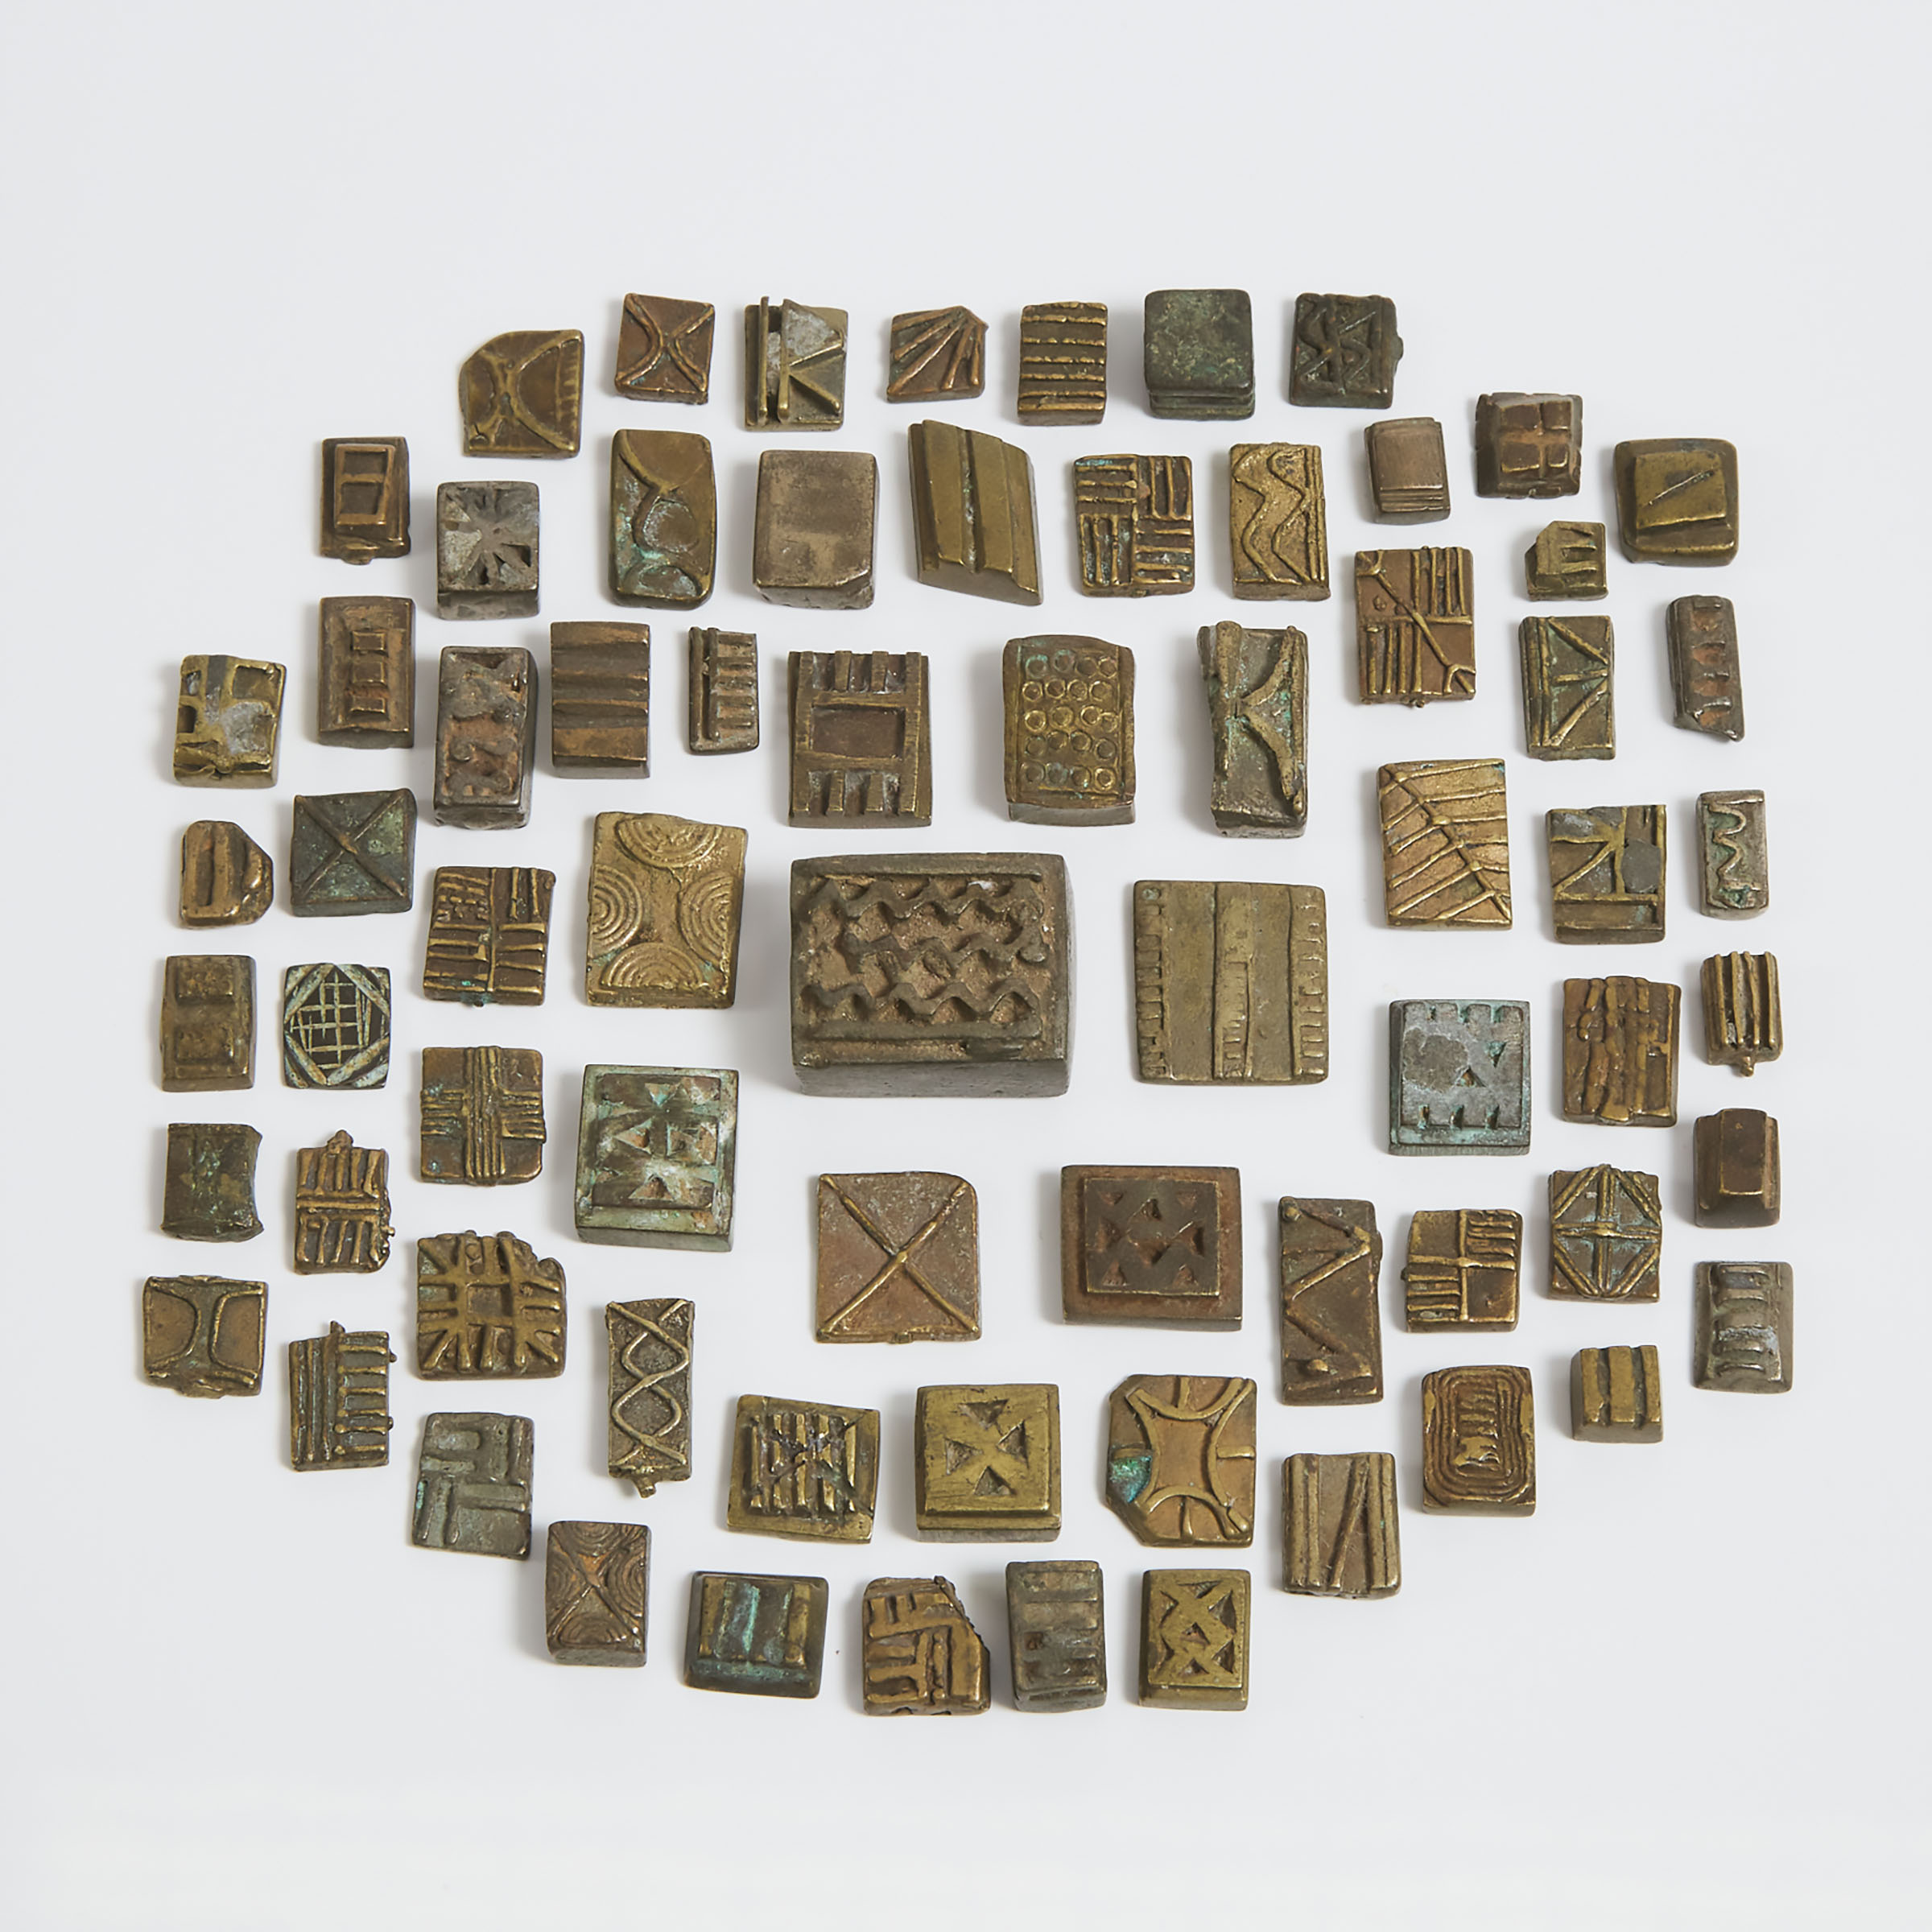 Group of 75 Akan Goldweights, Ghana, West Africa, 19th/20th century